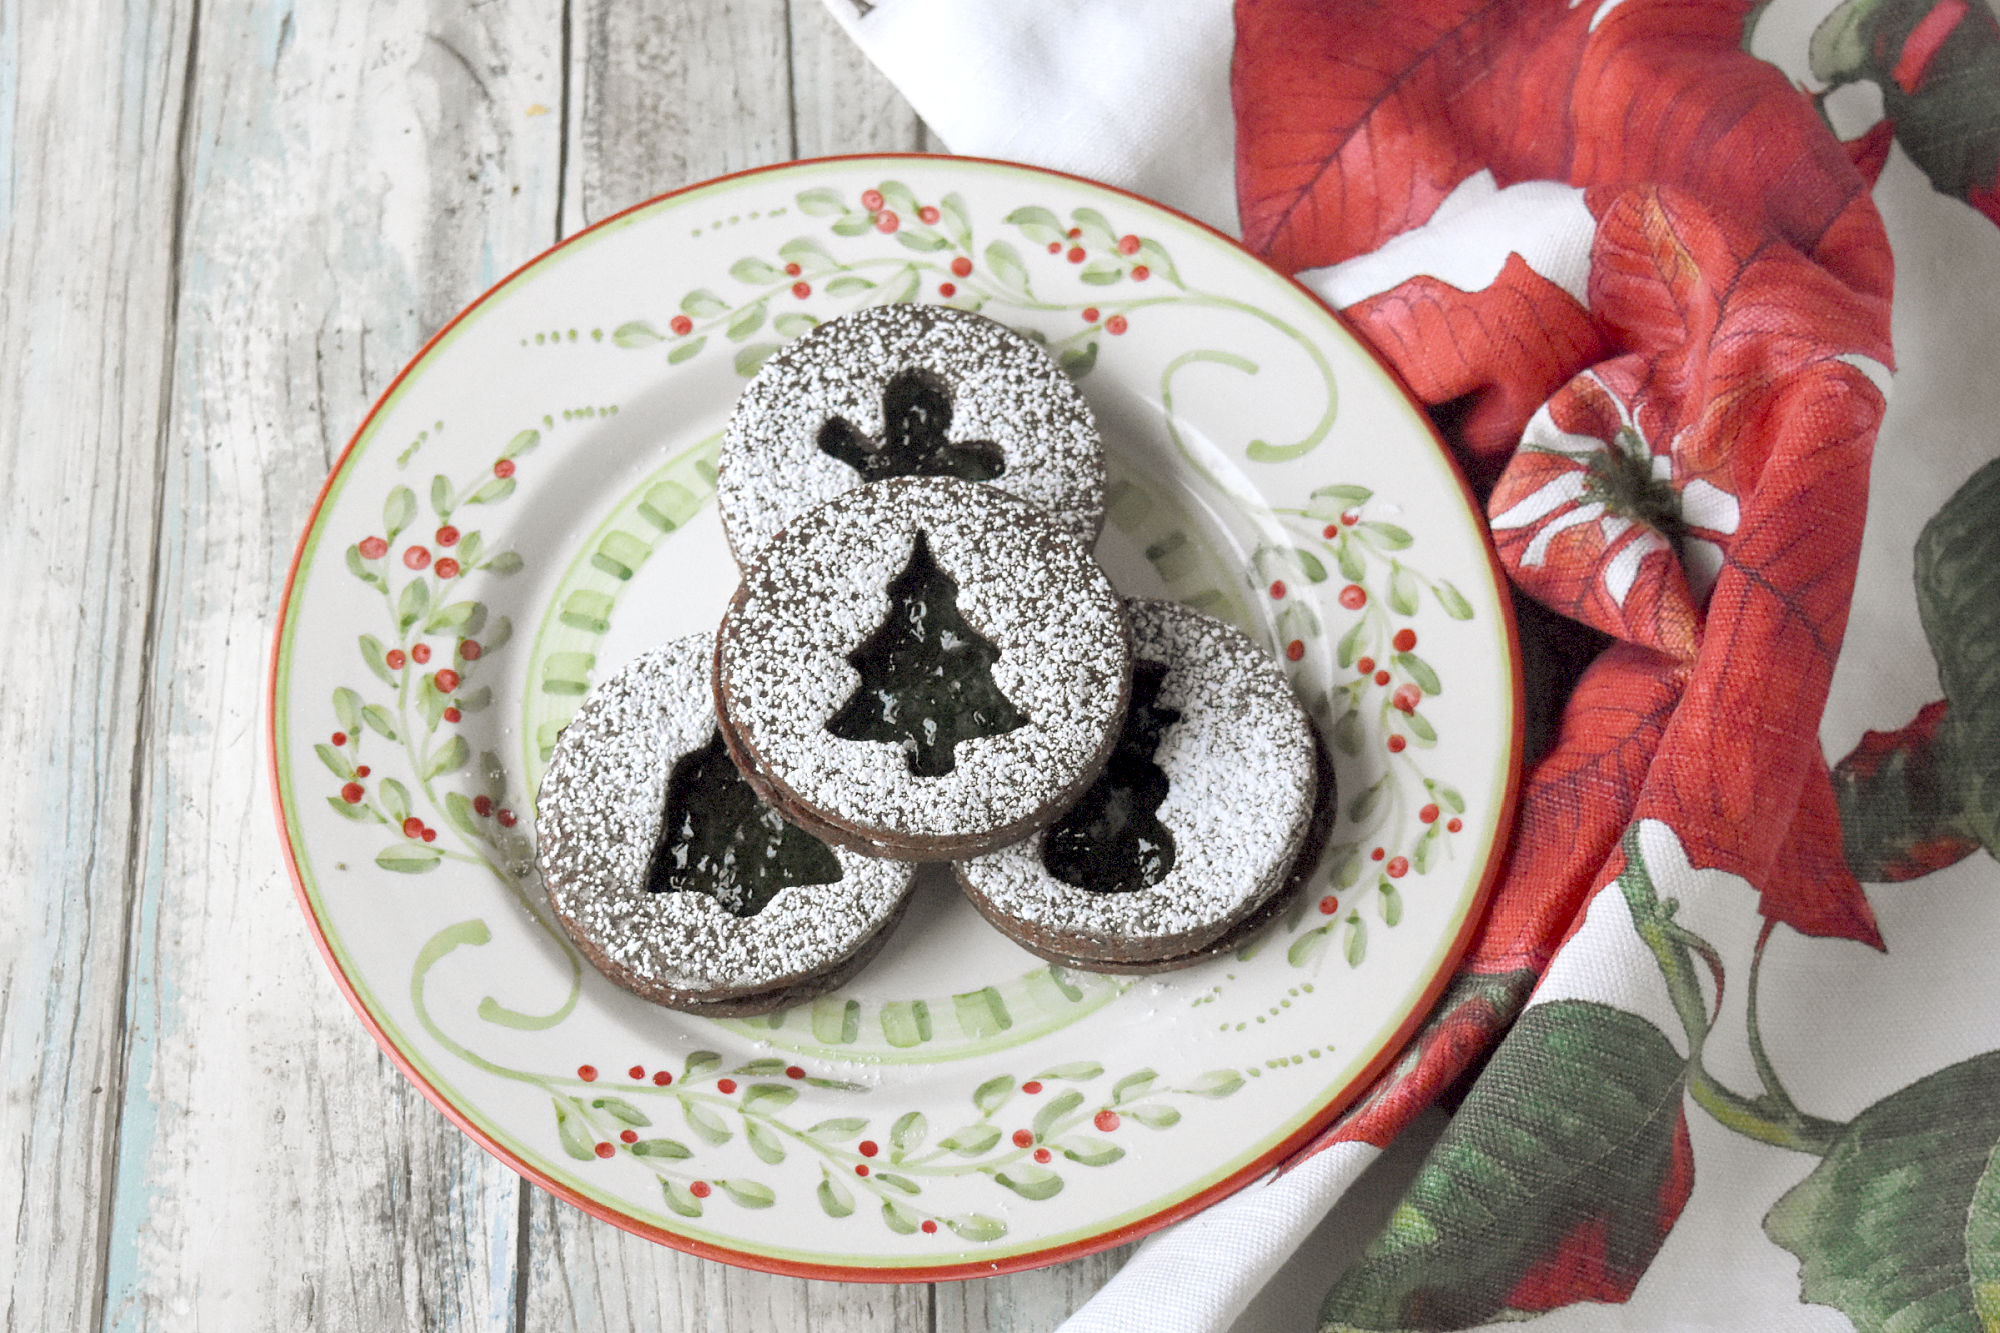 Chocolate Mint Linzer Cookies have a slightly sweet, chocolate shortbread like cookie filled with mint jelly.  Yes.  Mint jelly.  It’s a unique and delicious cookie for the holidays. #ChristmasCookies #linzercookies #mintjelly #chocolatemintcookies #cutoutcookies